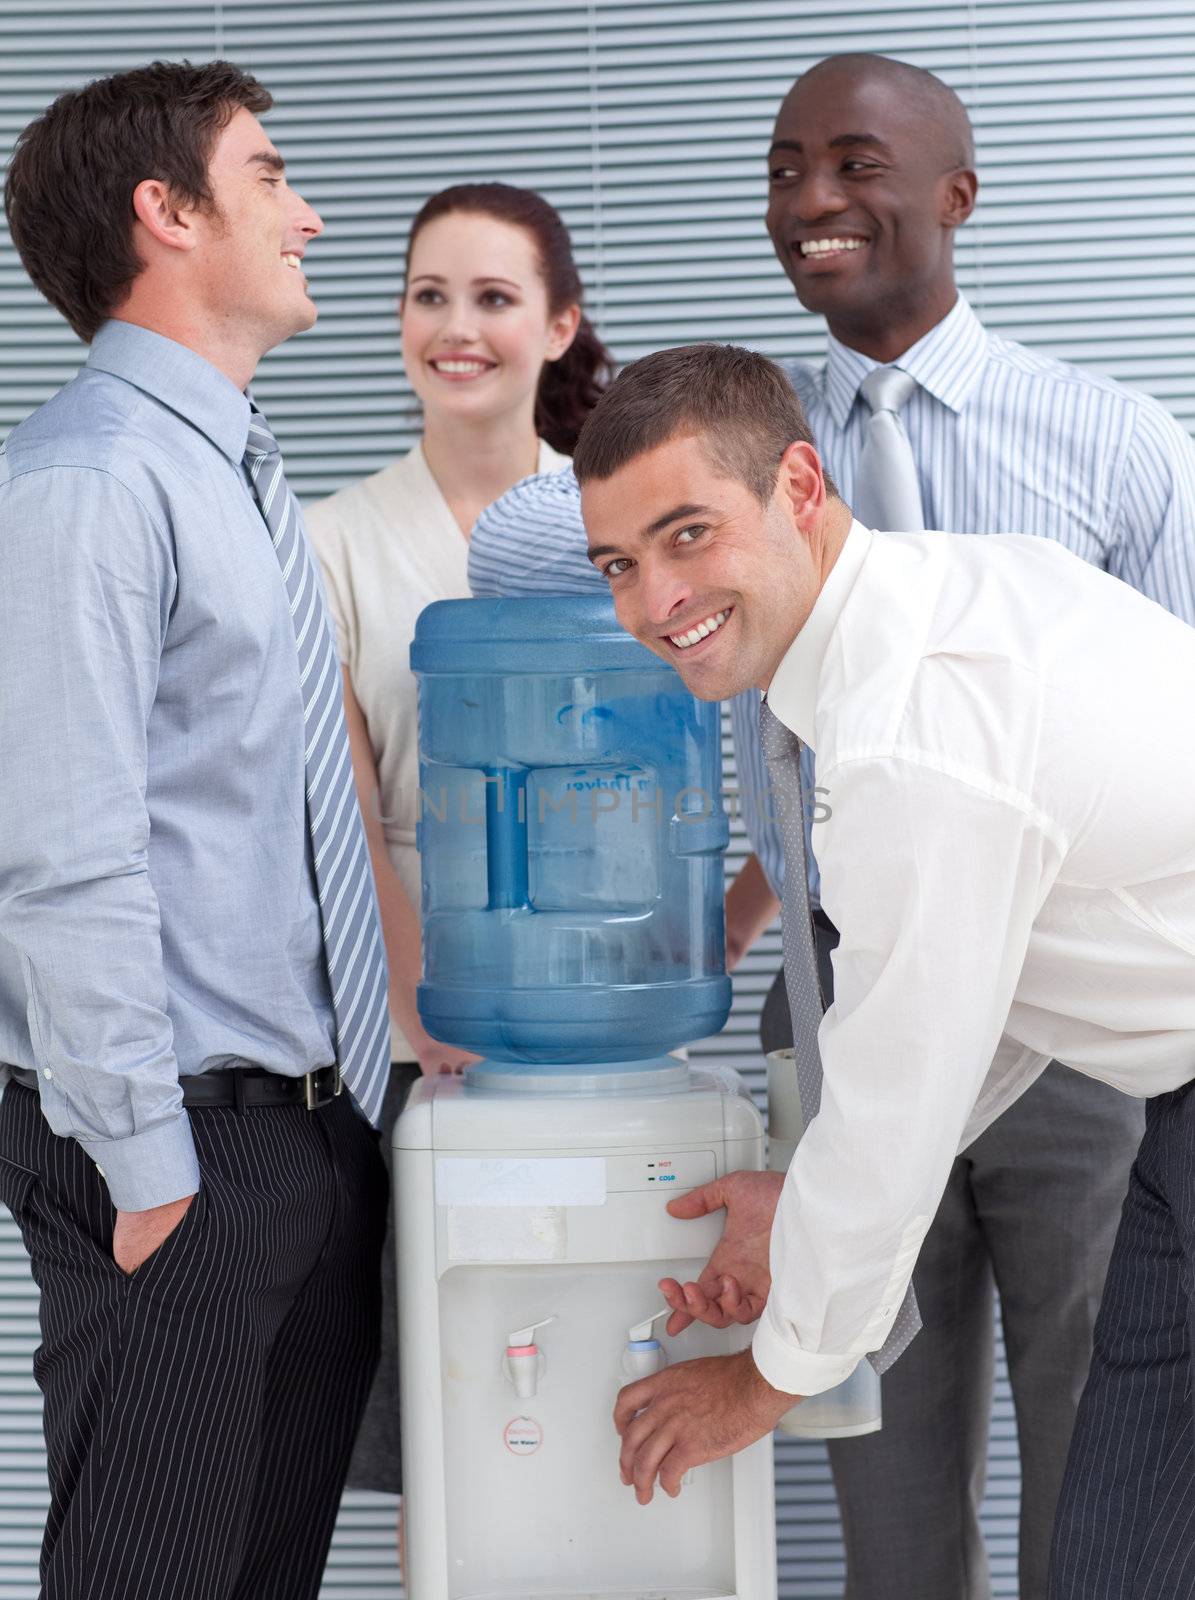 Busines colleagues talking around water cooler in workplace